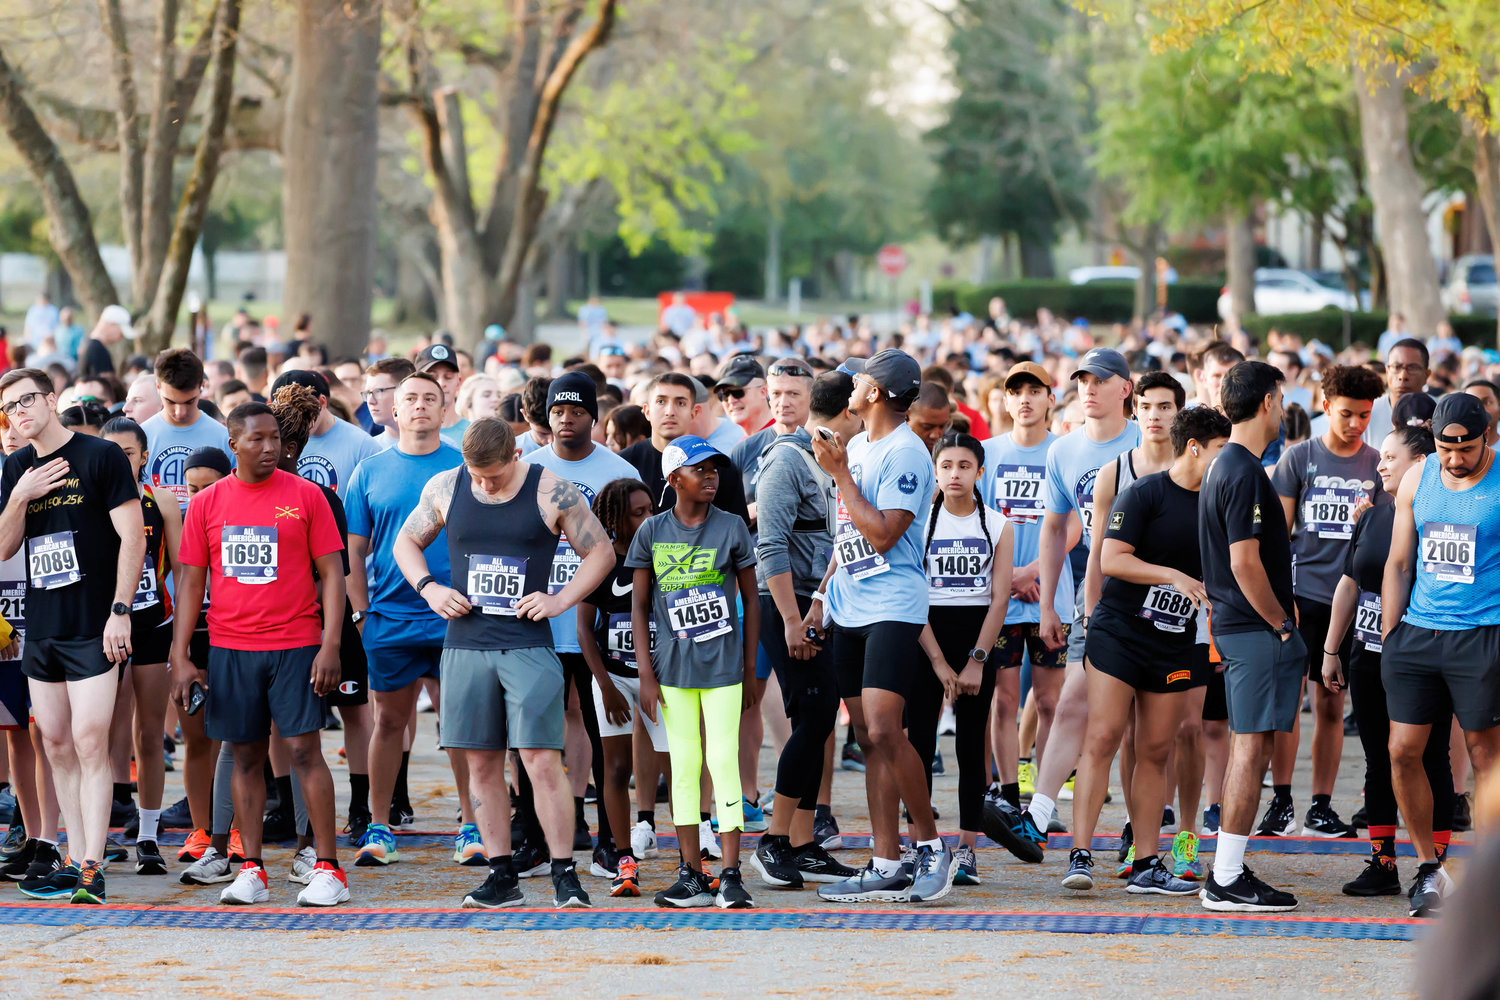 The in-person 5K and half marathon All American Races return to Fort Bragg on March 25, 2023.  Tony Wooten CityView Meida